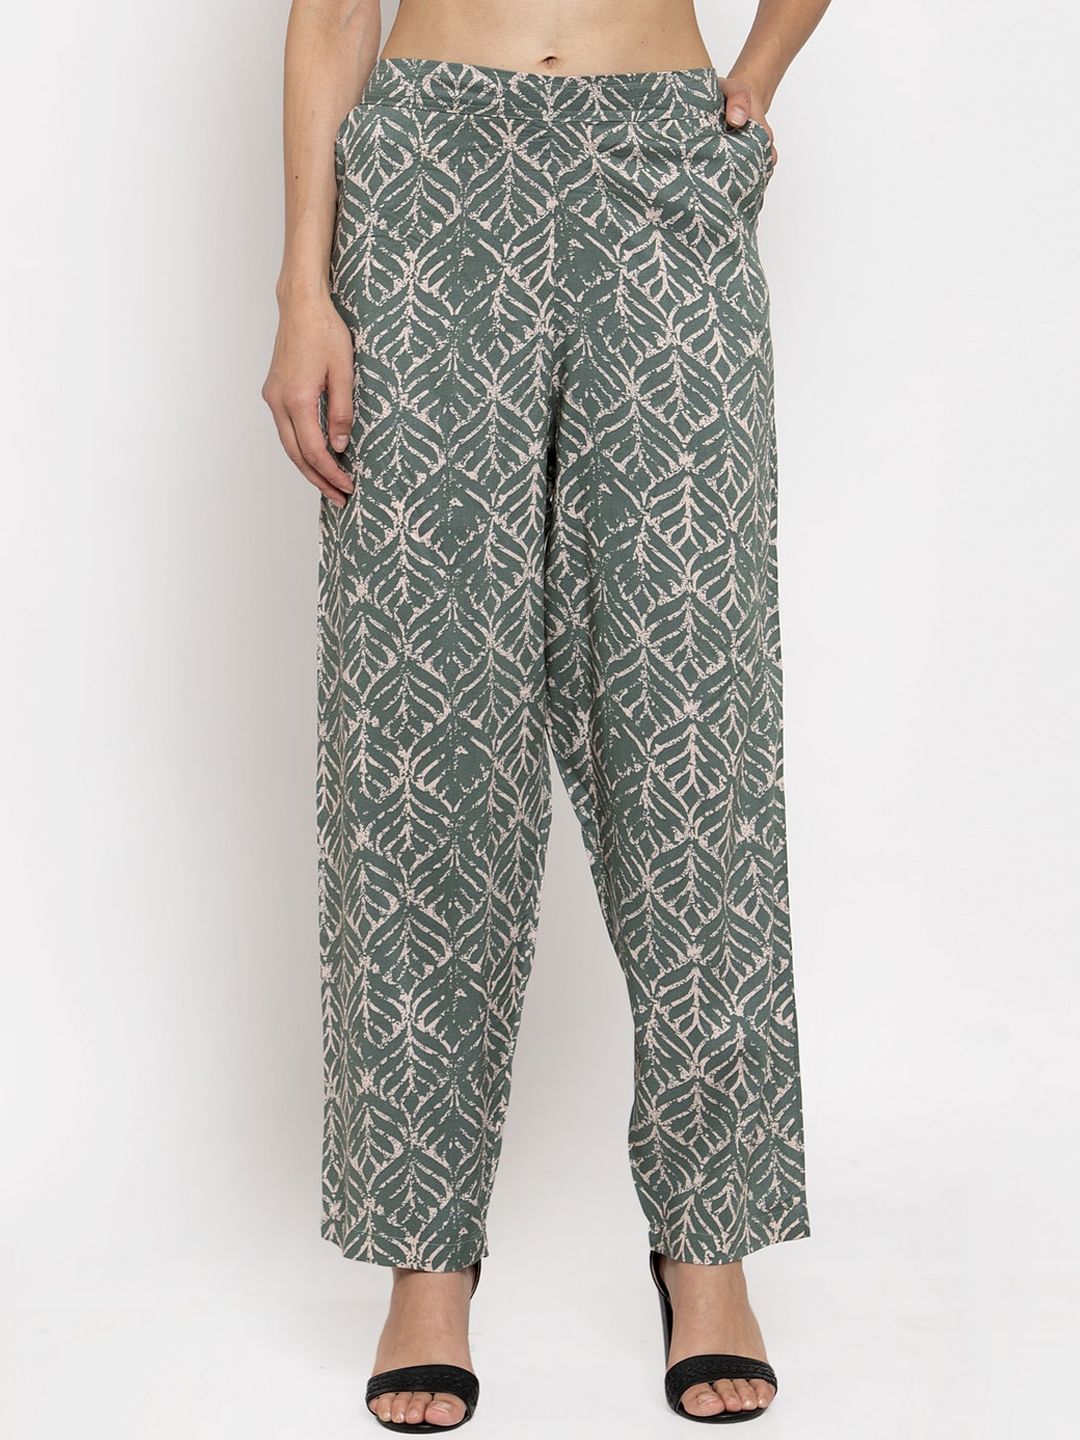 TAG 7 Women Green & Off-White Regular Fit Printed Regular Trousers Price in India